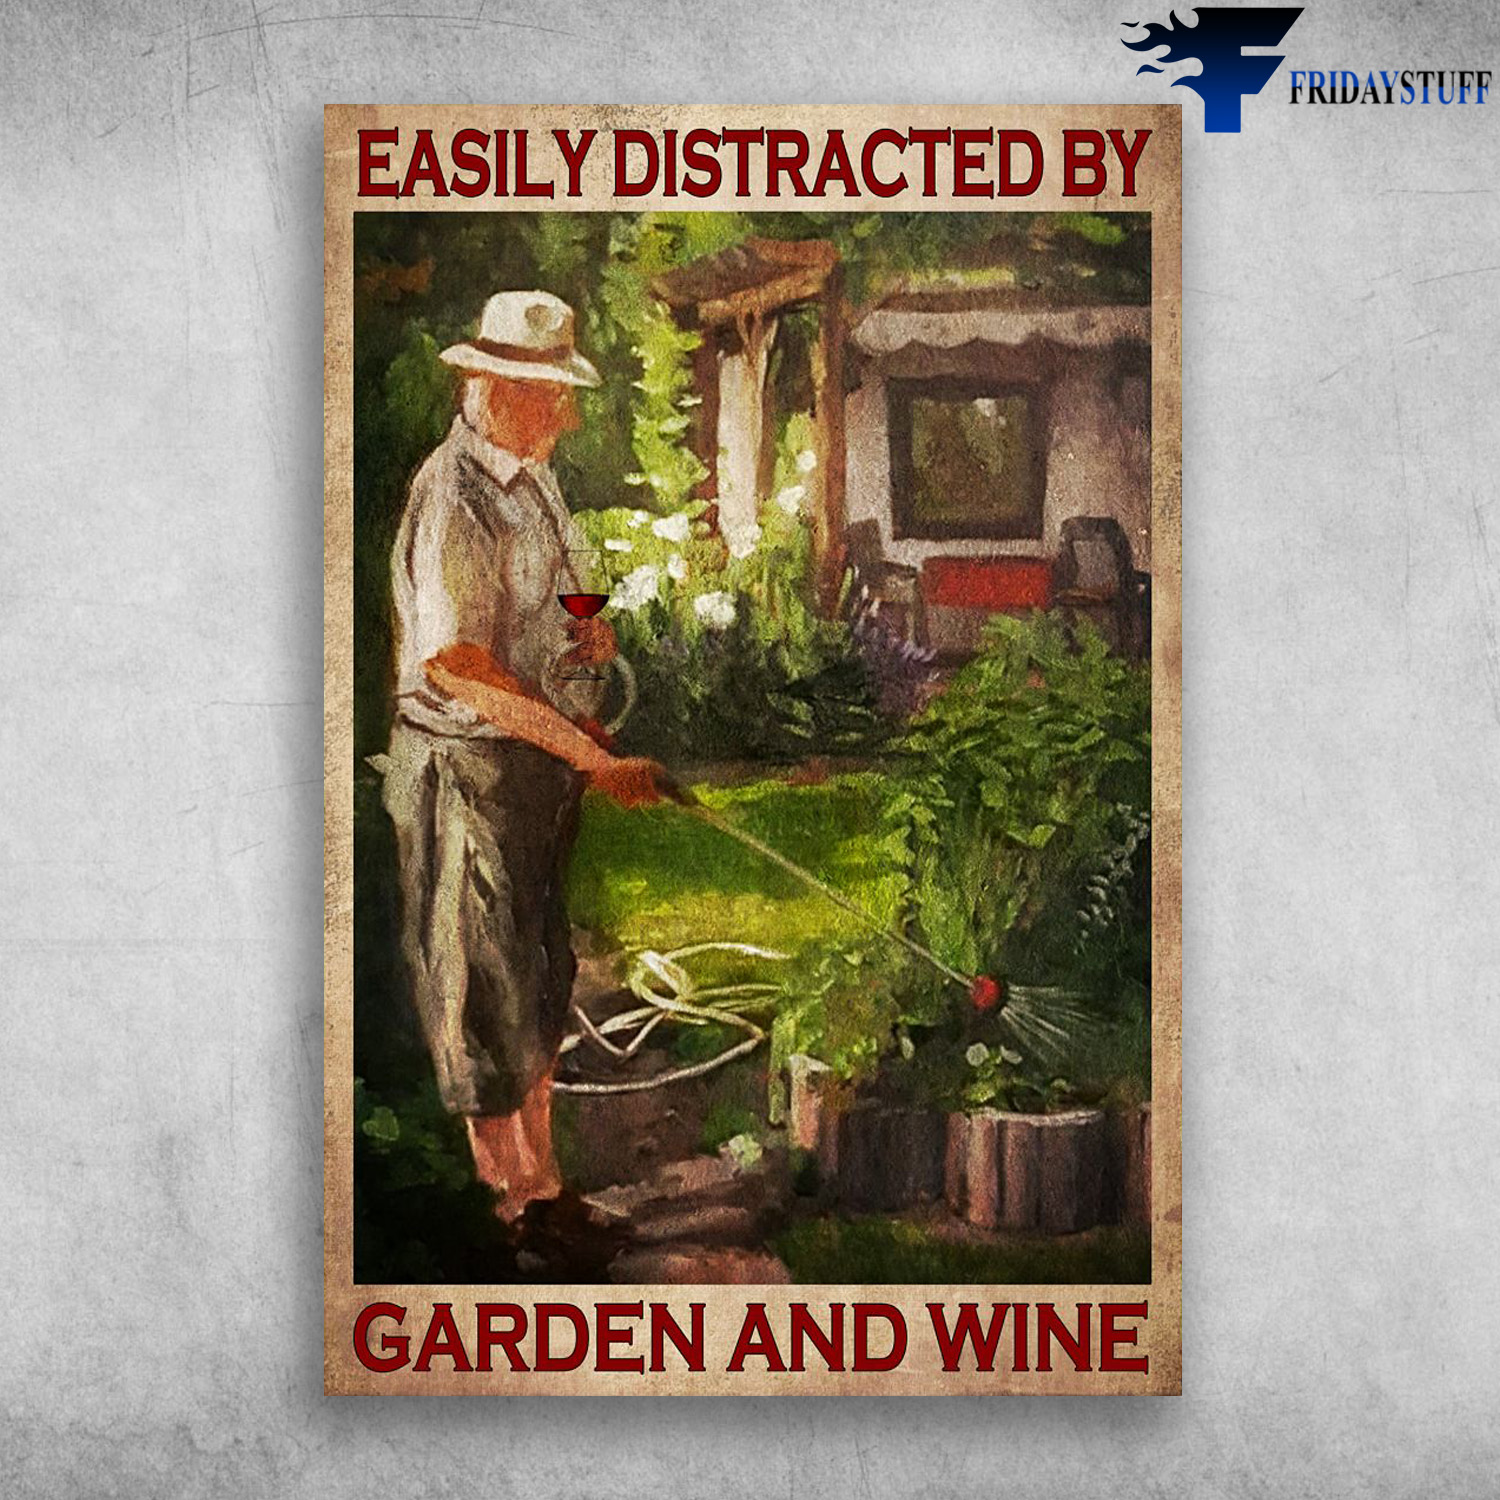 Old Man Love Garden And Wine - Easily Distracted By Garden And Wine